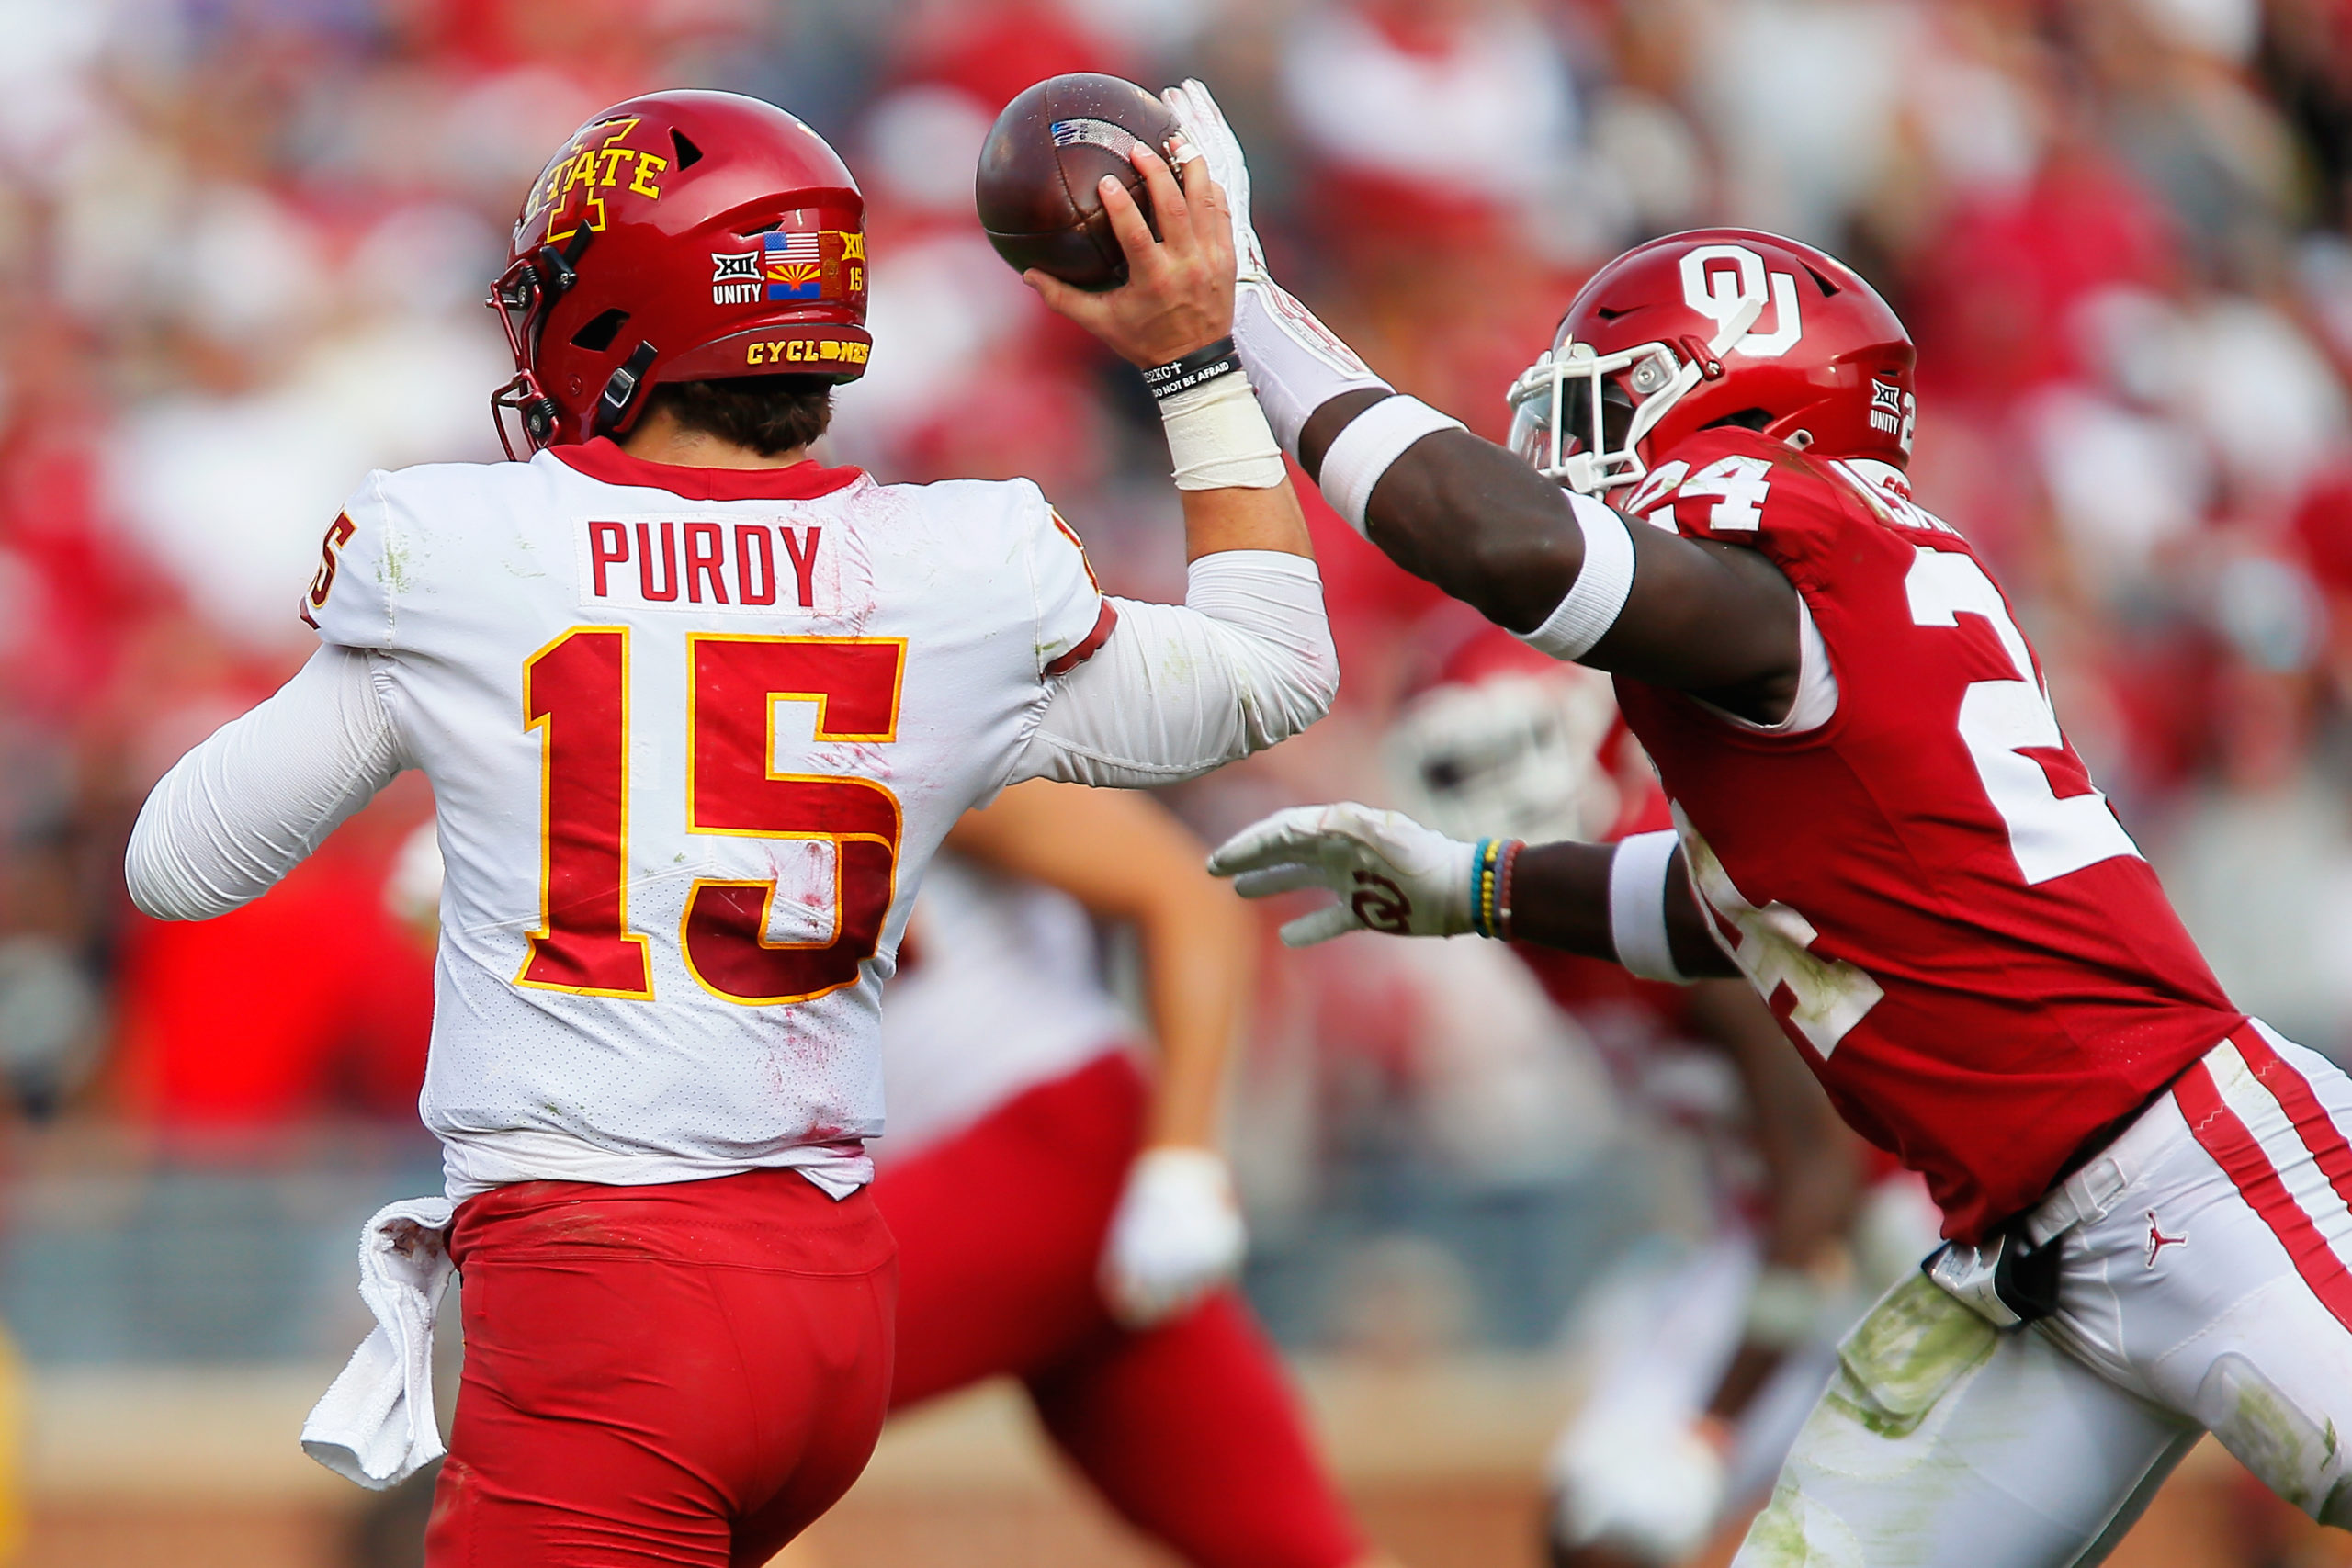 NORMAN, OK - NOVEMBER 20: Linebacker Brian Asamoah #24 of the Oklahoma Sooners knocks the ball out of the hands of quarterback Brock Purdy #15 of the Iowa State Cyclones for a fumble recovered by Purdy in the second quarter at Gaylord Family Oklahoma Memorial Stadium on November 20, 2021 in Norman, Oklahoma. Brian Bahr/Getty Images